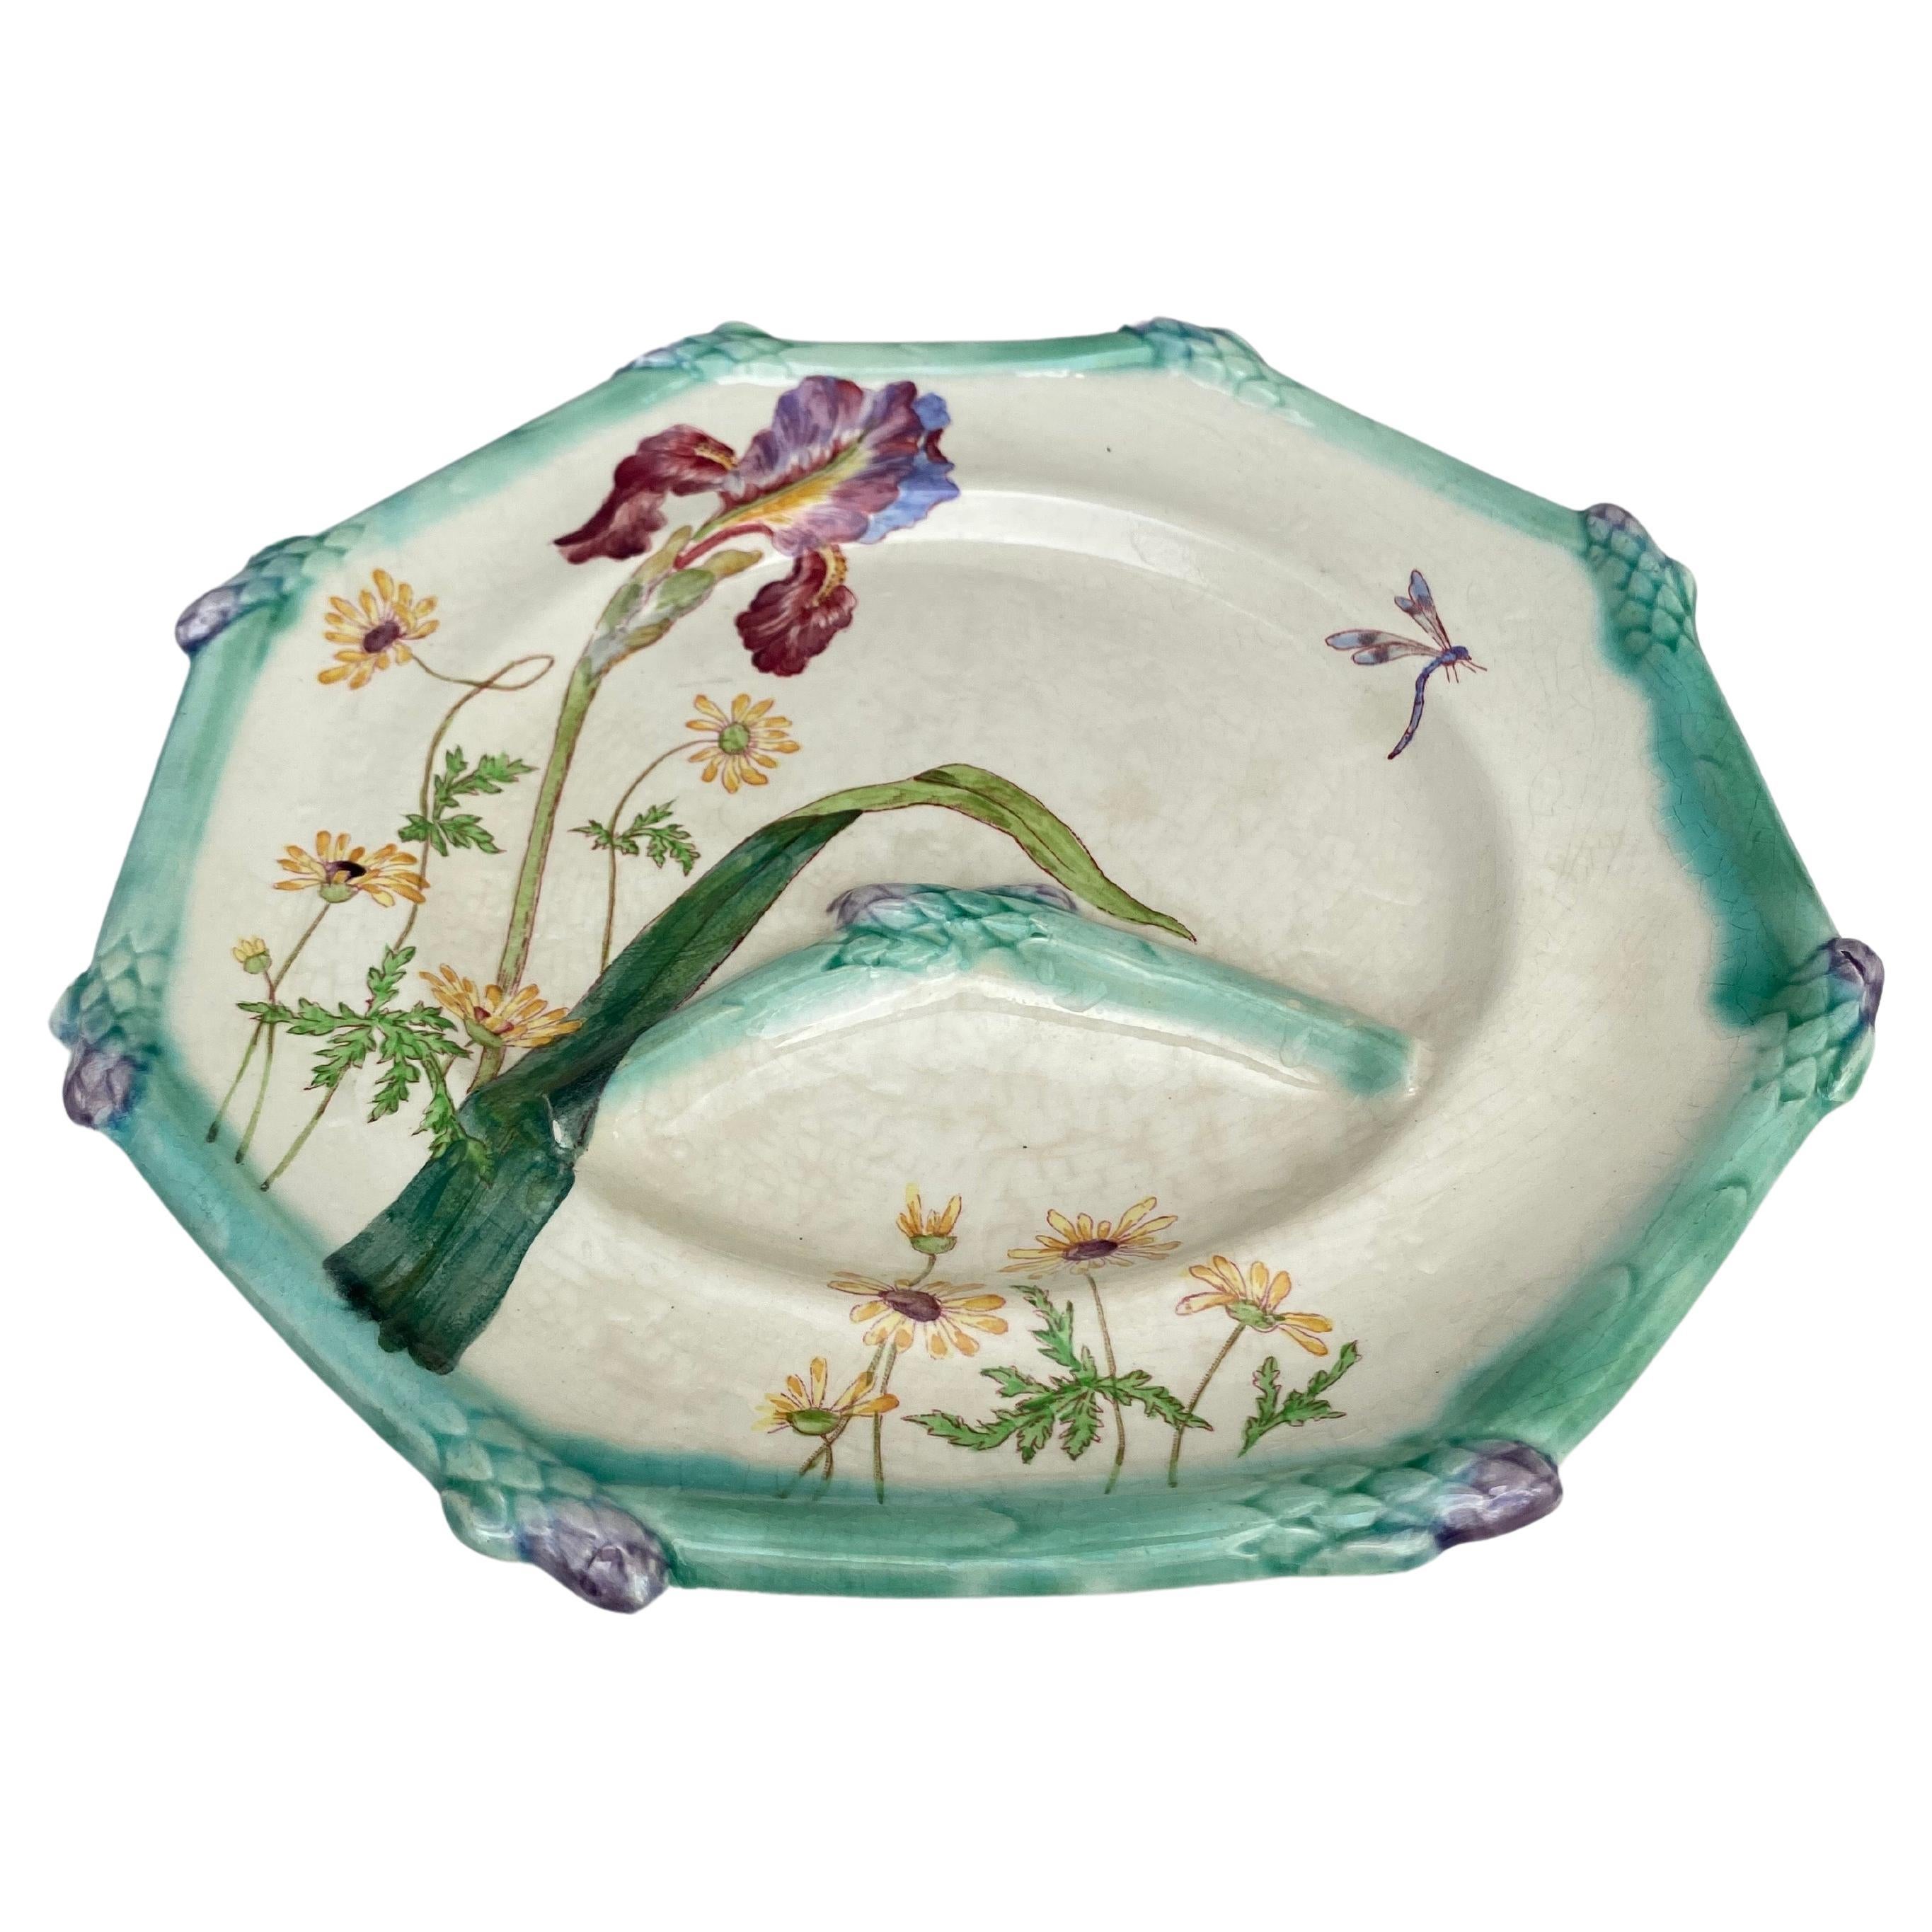 Rare 19th French Majolica Asparagus octogonal plate signed Iris Longchamp.
Iris, dragonfly and yellow daisies.